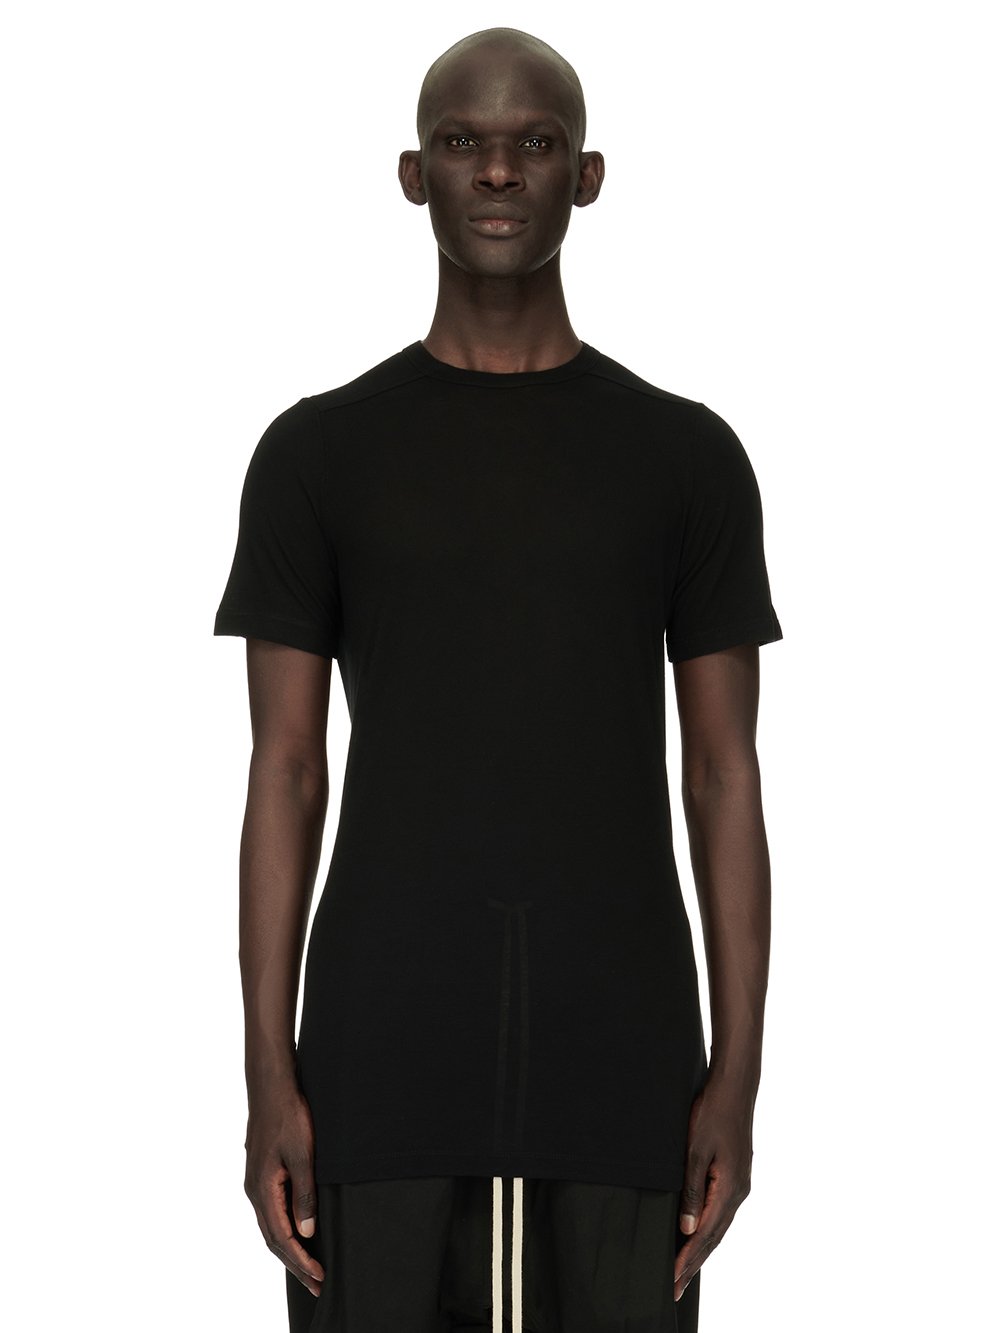 RICK OWENS FOREVER LEVEL T IN BLACK VISCOSE SILK JERSEY